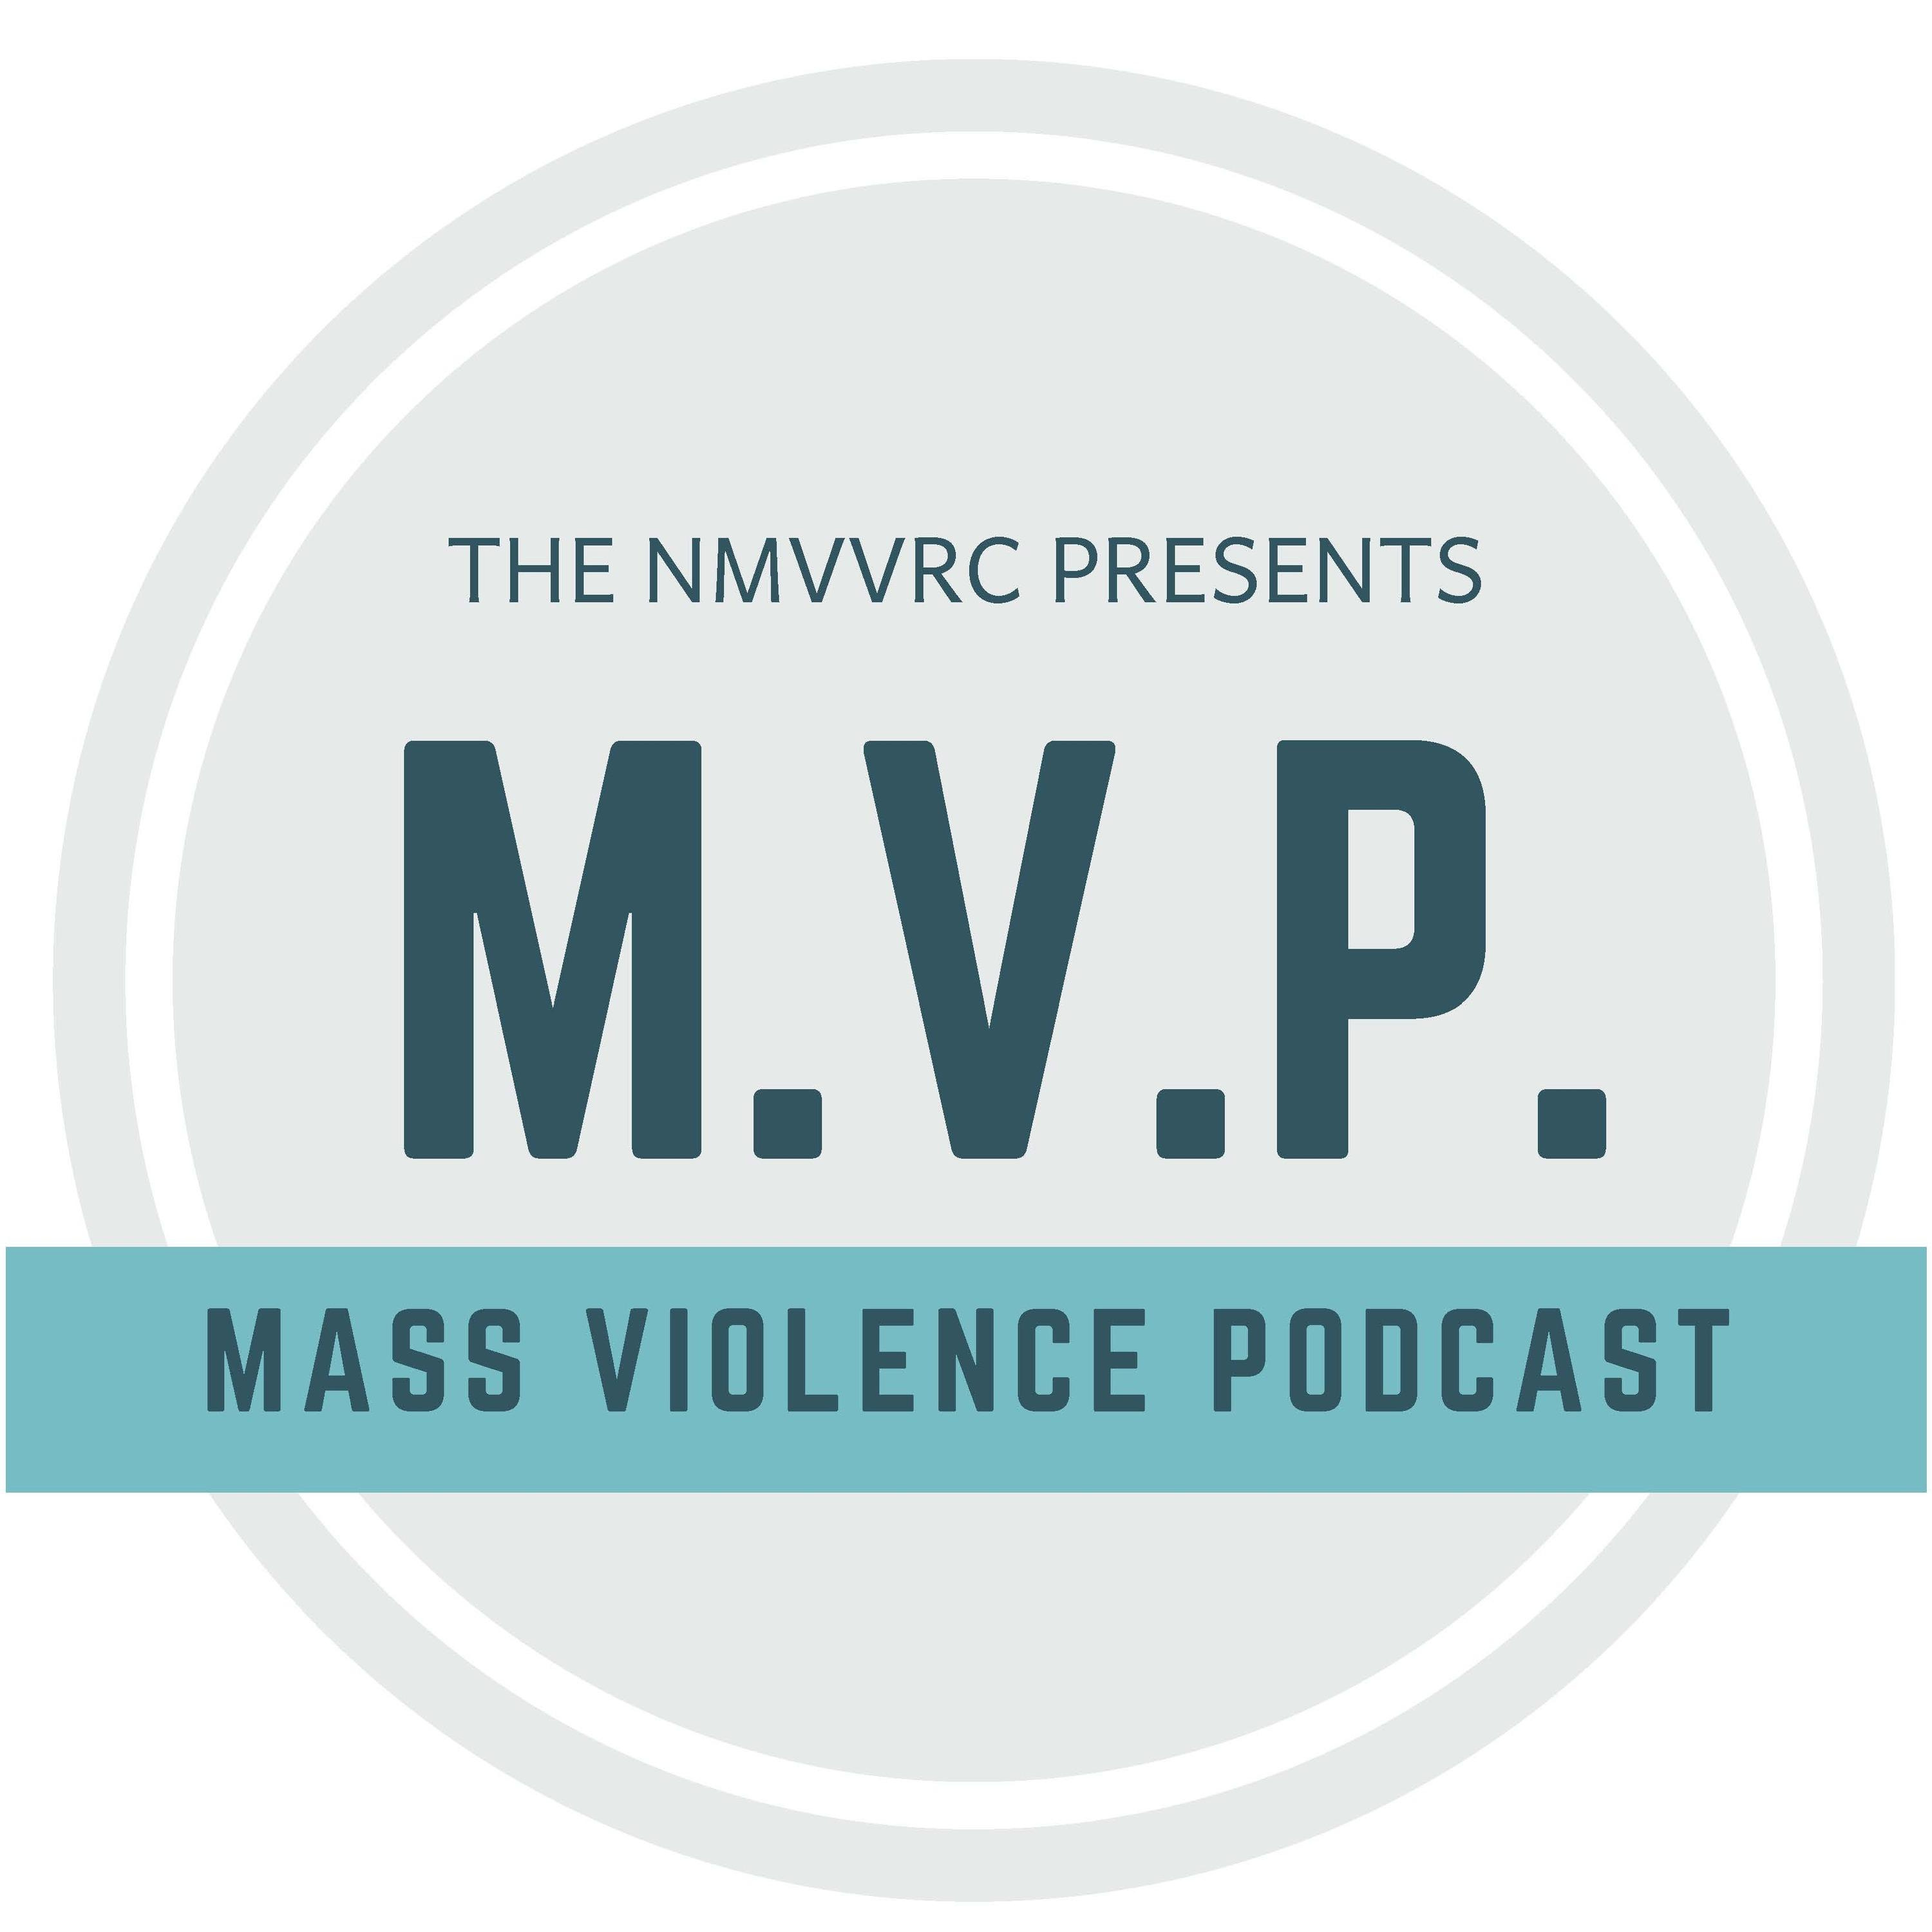 Log for the NMVVRC podcast, MVP, The Mass Violence Podcast consisting of the name M.V.P. in dark green text centered over a light greenish gray circle with smaller text above saying The NMVVRC Presents. A teal rectangle is below the large centered MVP text with dark green text Mass Violence Podcast. 